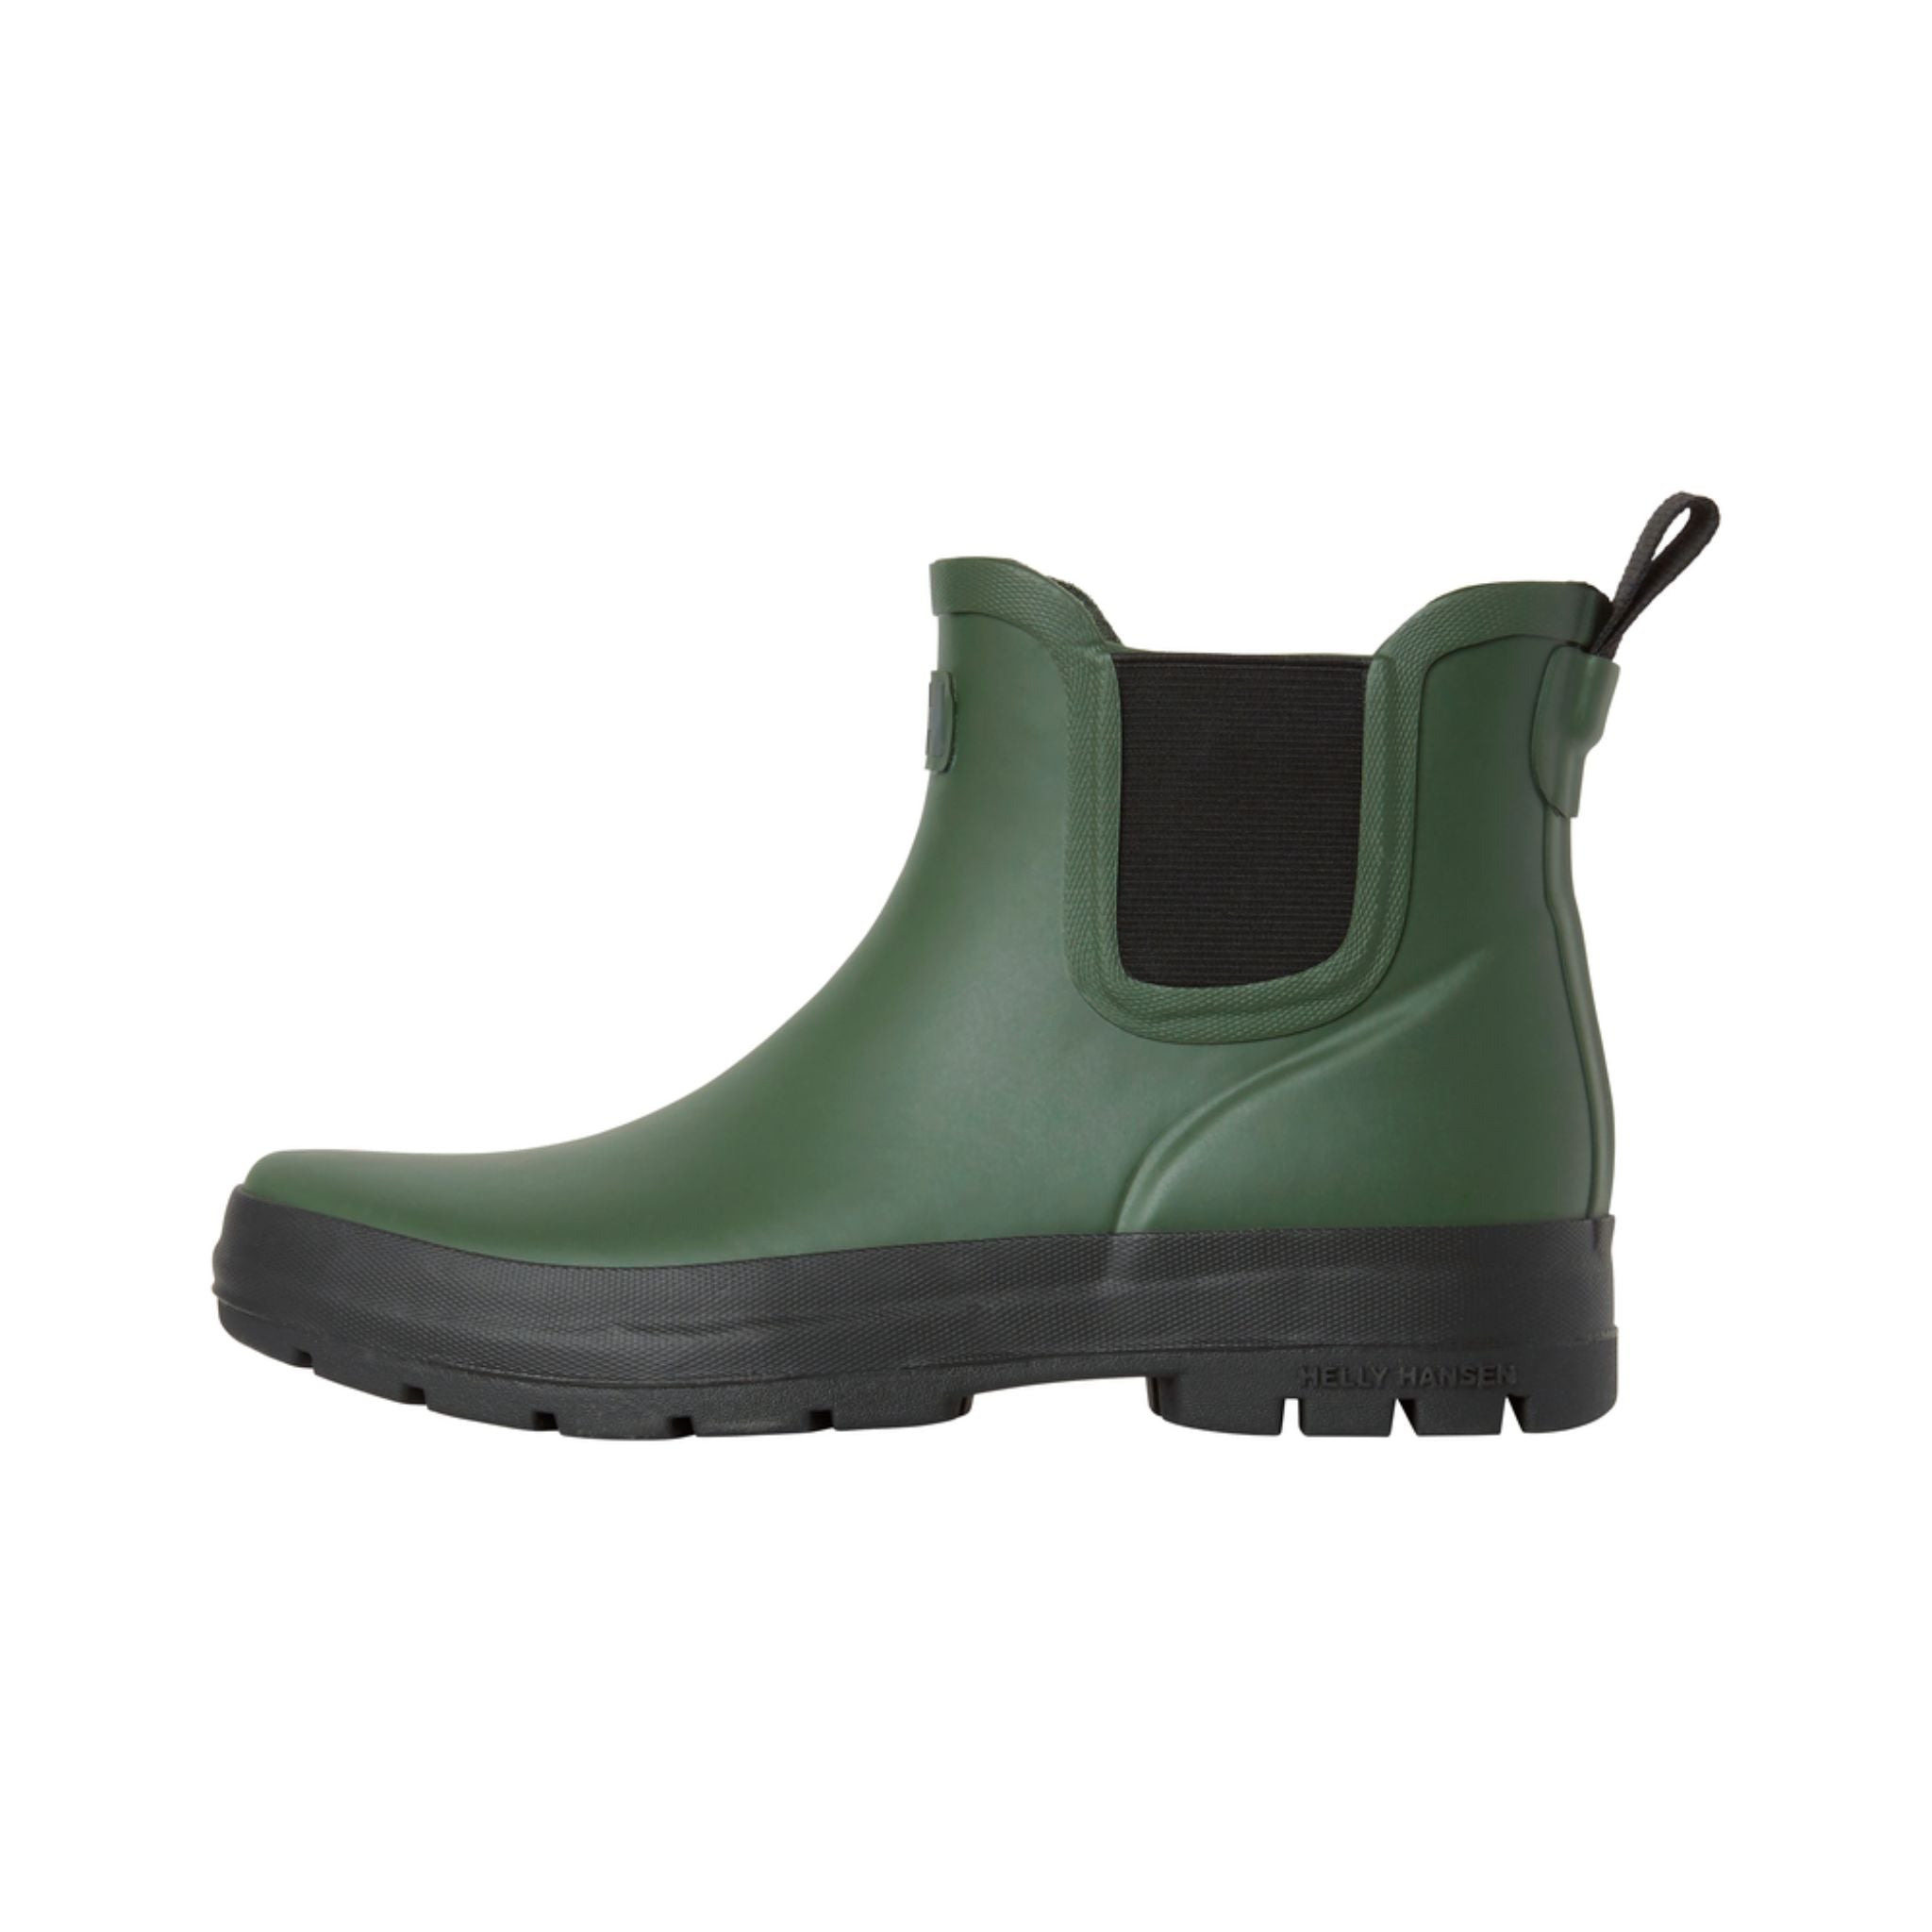 Helly Hansen Womens Adel Rubber Boots | Helly Hansen | Portwest - The Outdoor Shop